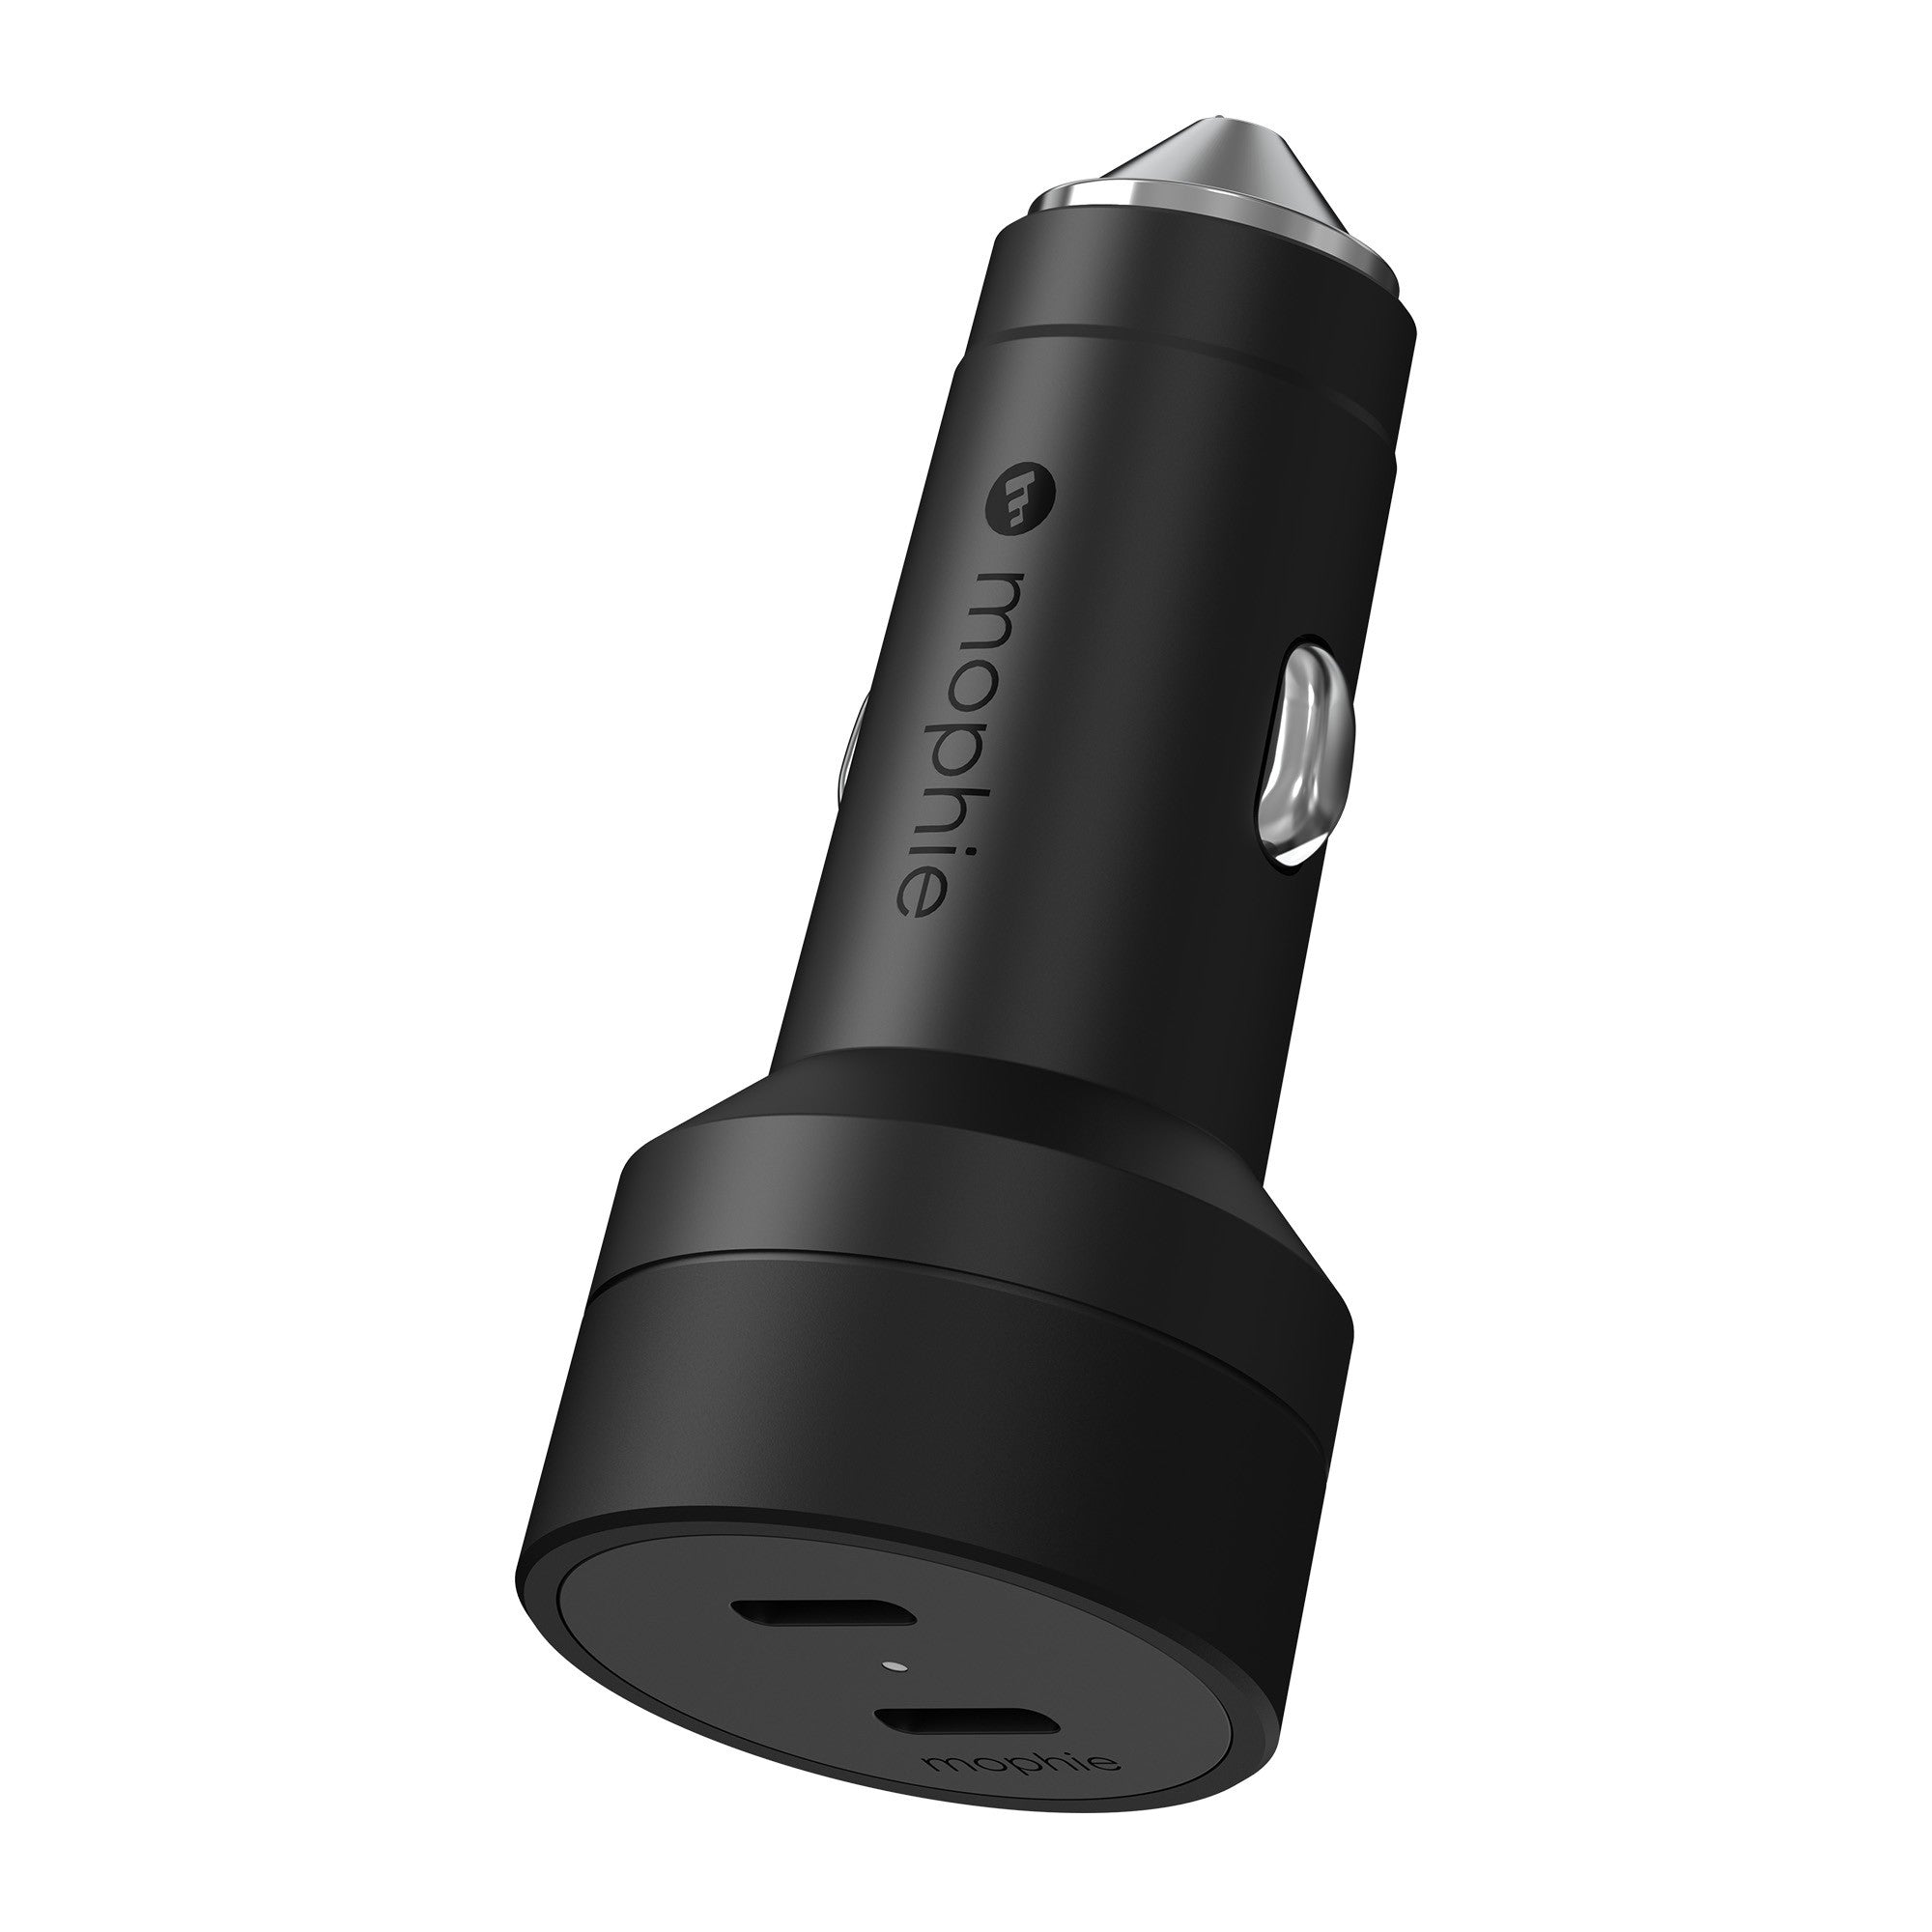 Mophie 60W Dual USB-C Car Charger - Black - 15-11429